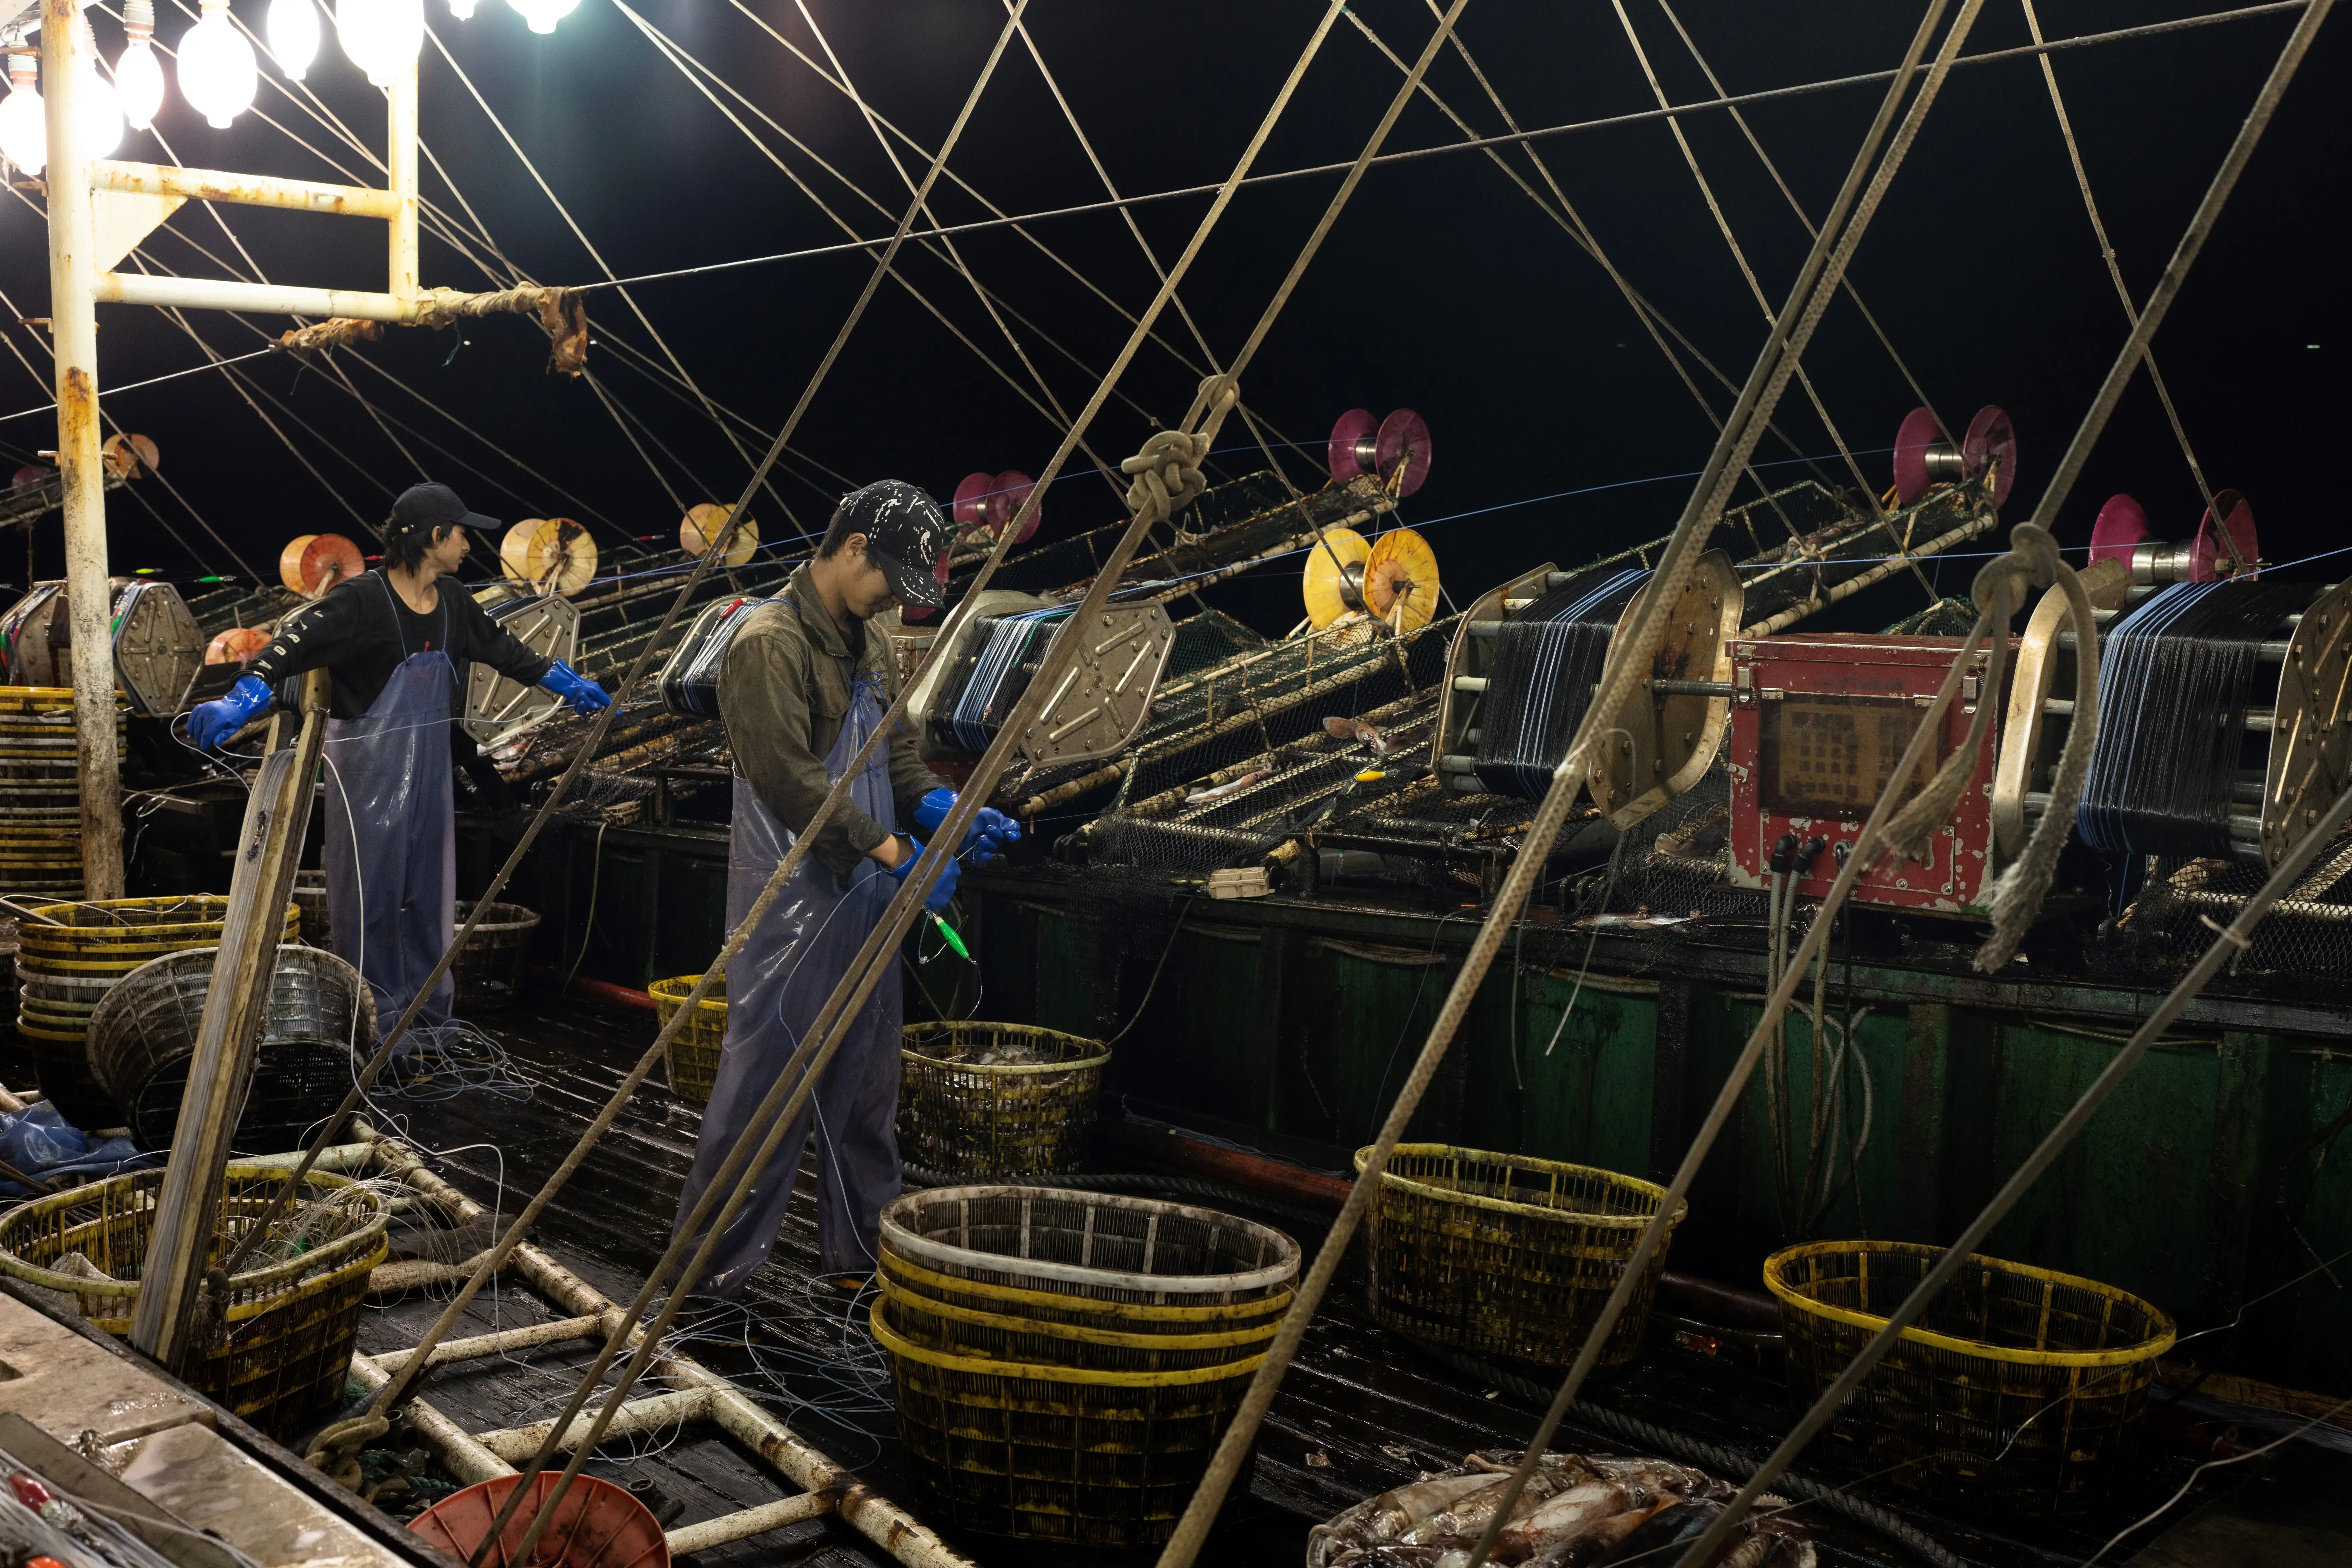 The crew aboard a Chinese fishing vessel use jigs and bright lights to catch squid at night on July 7, 2022. Image by Ed Ou/The Outlaw Ocean Project.